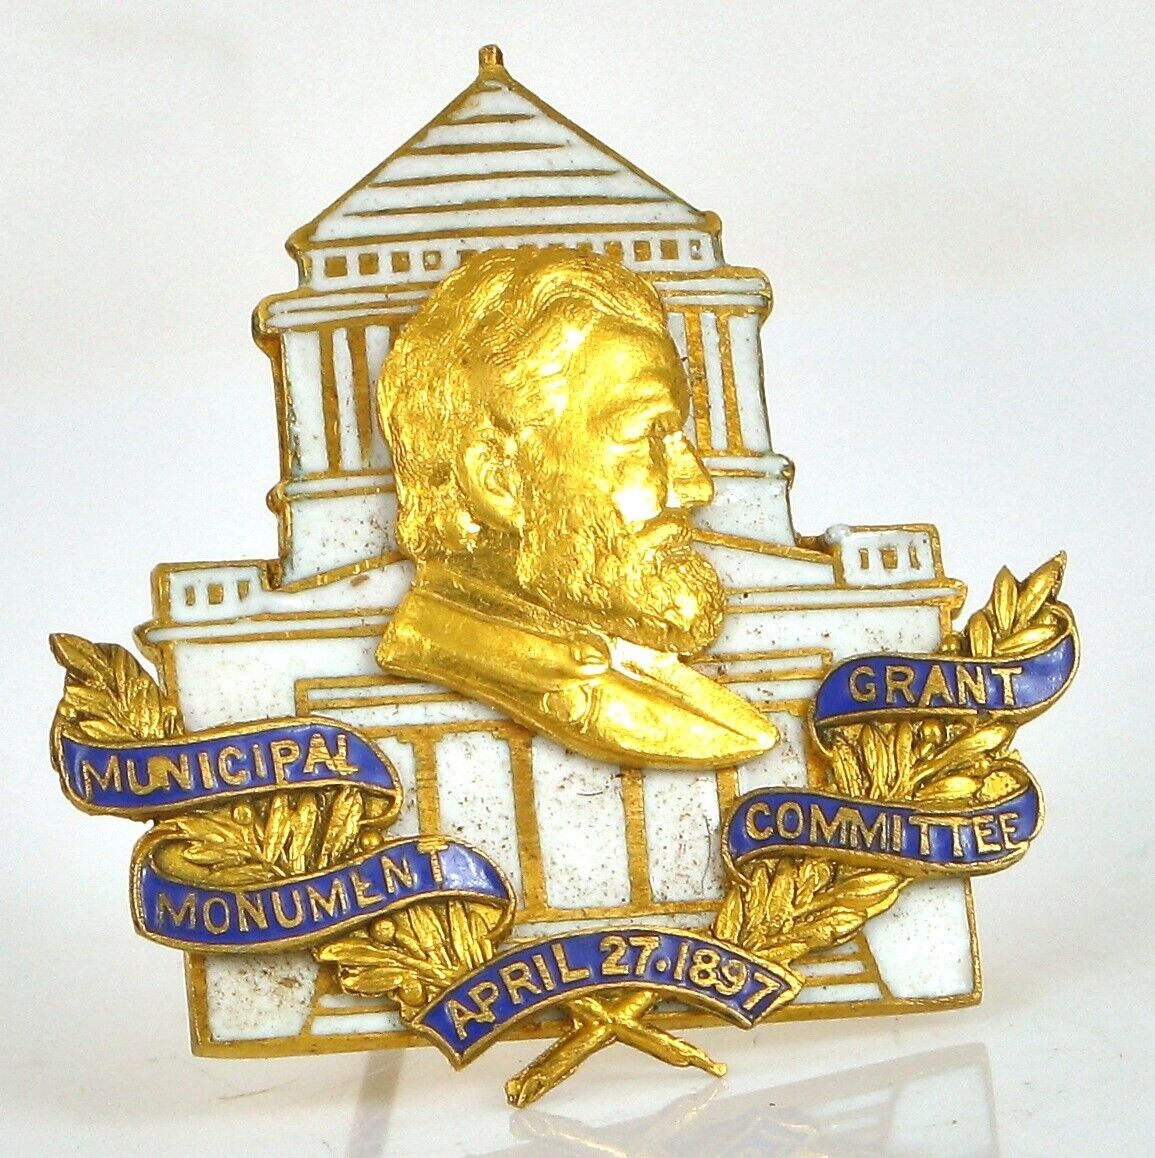 ANTIQUE 1897 ULYSSES S GRANT MUNICIPAL MONUMENT COMMITTEE PIN TIFFANY & CO NYC 